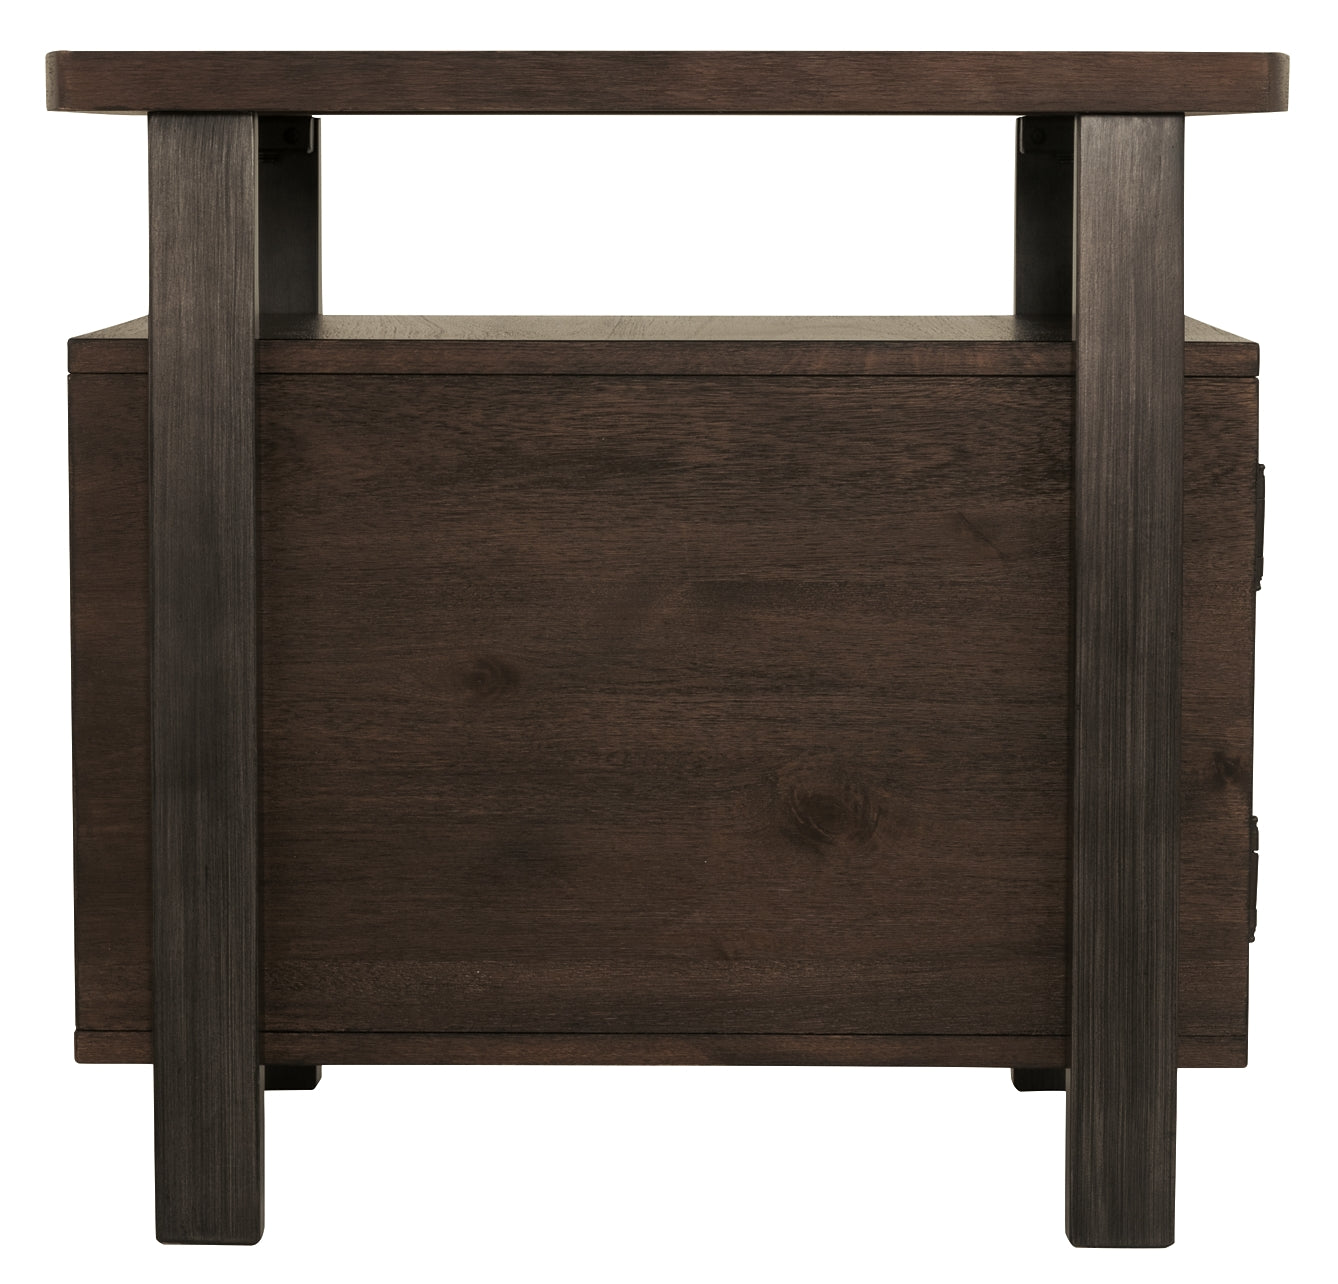 Vailbry Chair Side End Table JB's Furniture  Home Furniture, Home Decor, Furniture Store